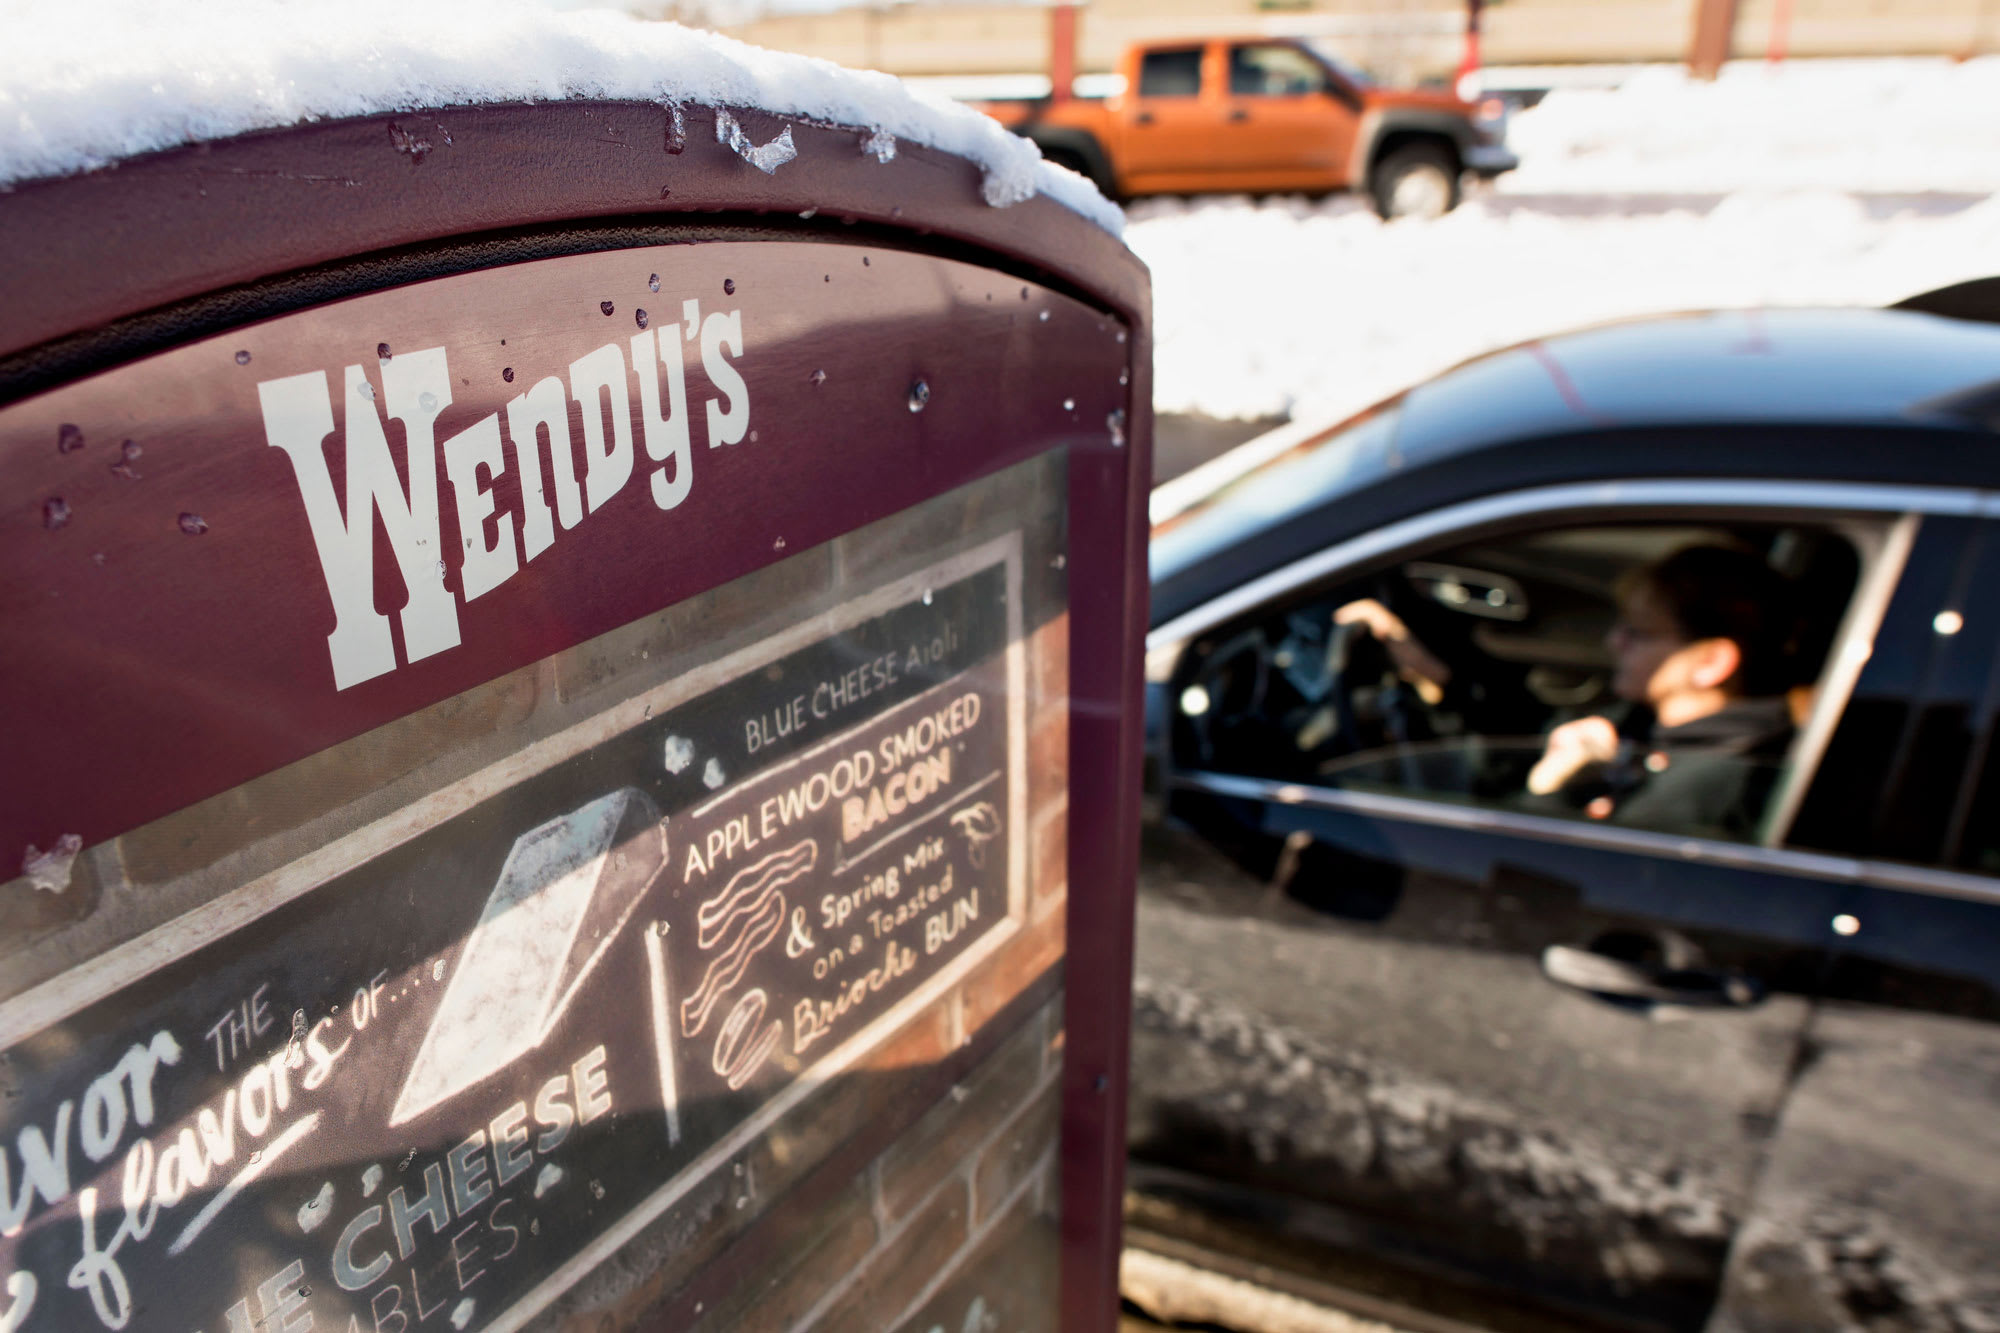 Analysts are skeptical about Wendy's nationwide breakfast; stock sinks 10%